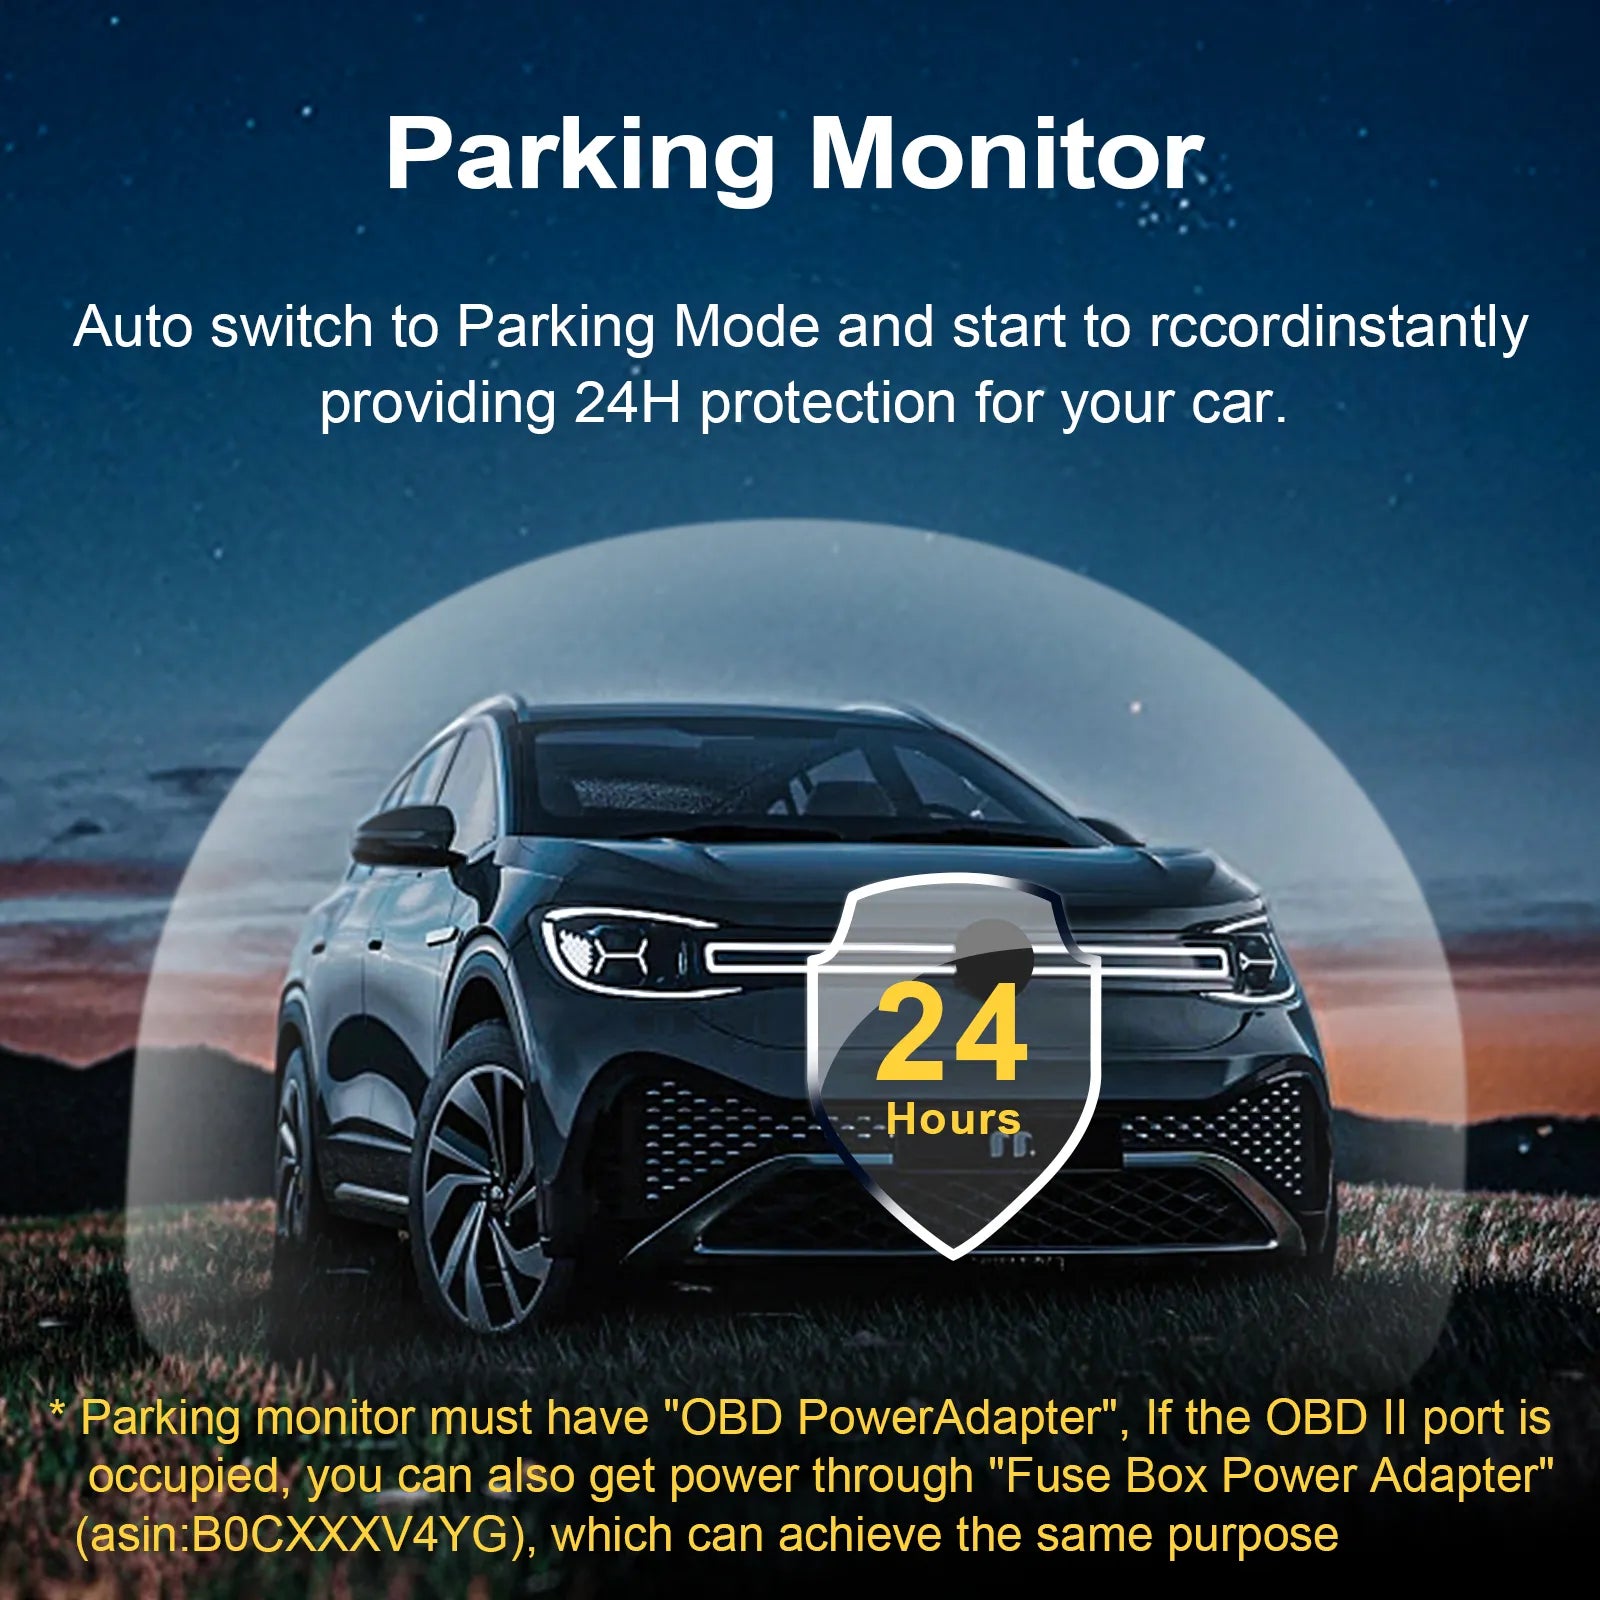 Parking Monotor for 24 hours